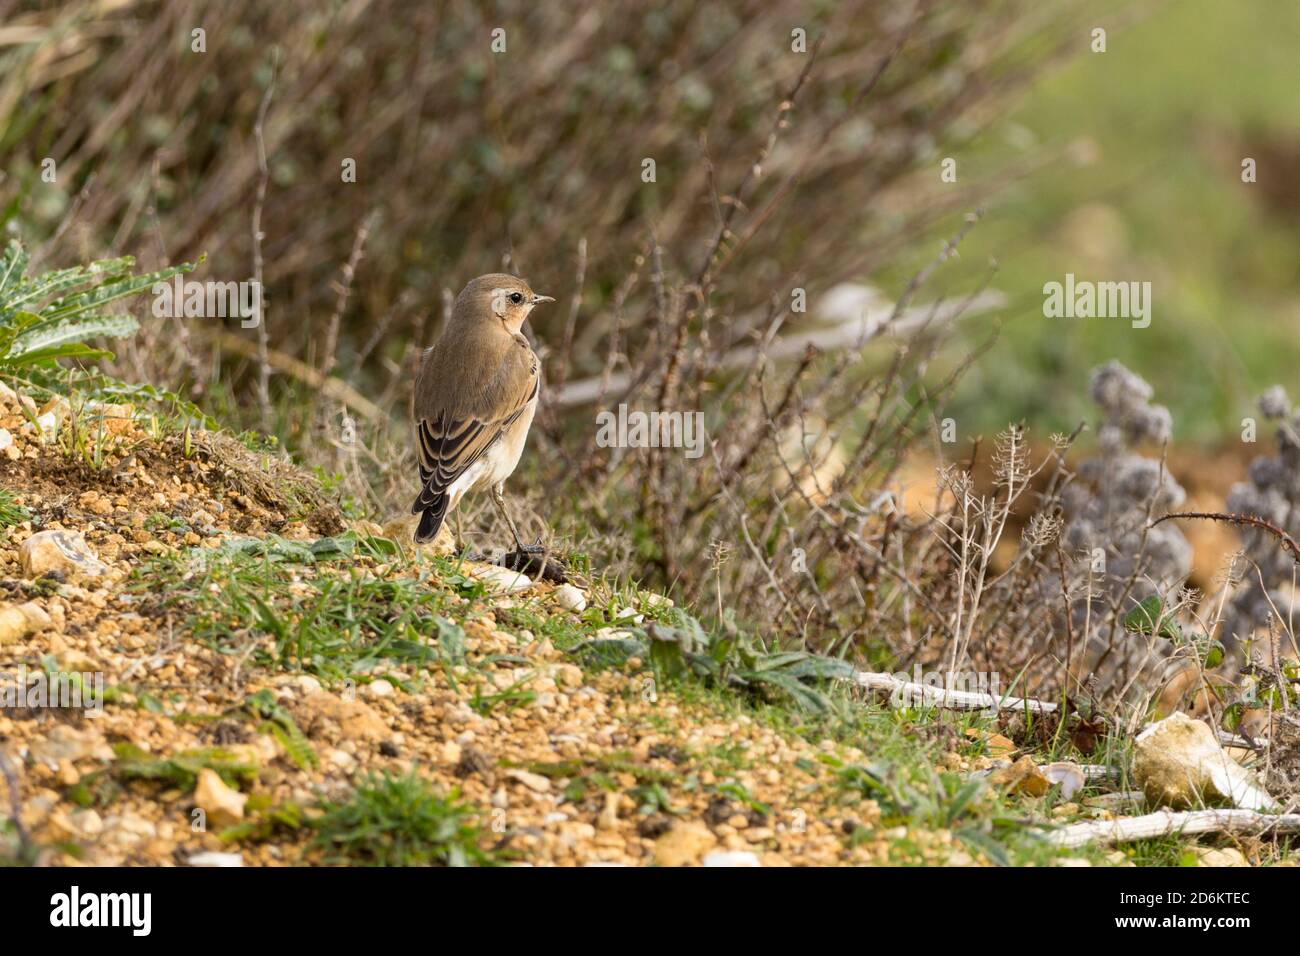 Wheatear Oenanthe oenanthe female sandy brown plumage august winter time white rump pinkish legs with black feet black tail feathers on south coast UK Stock Photo